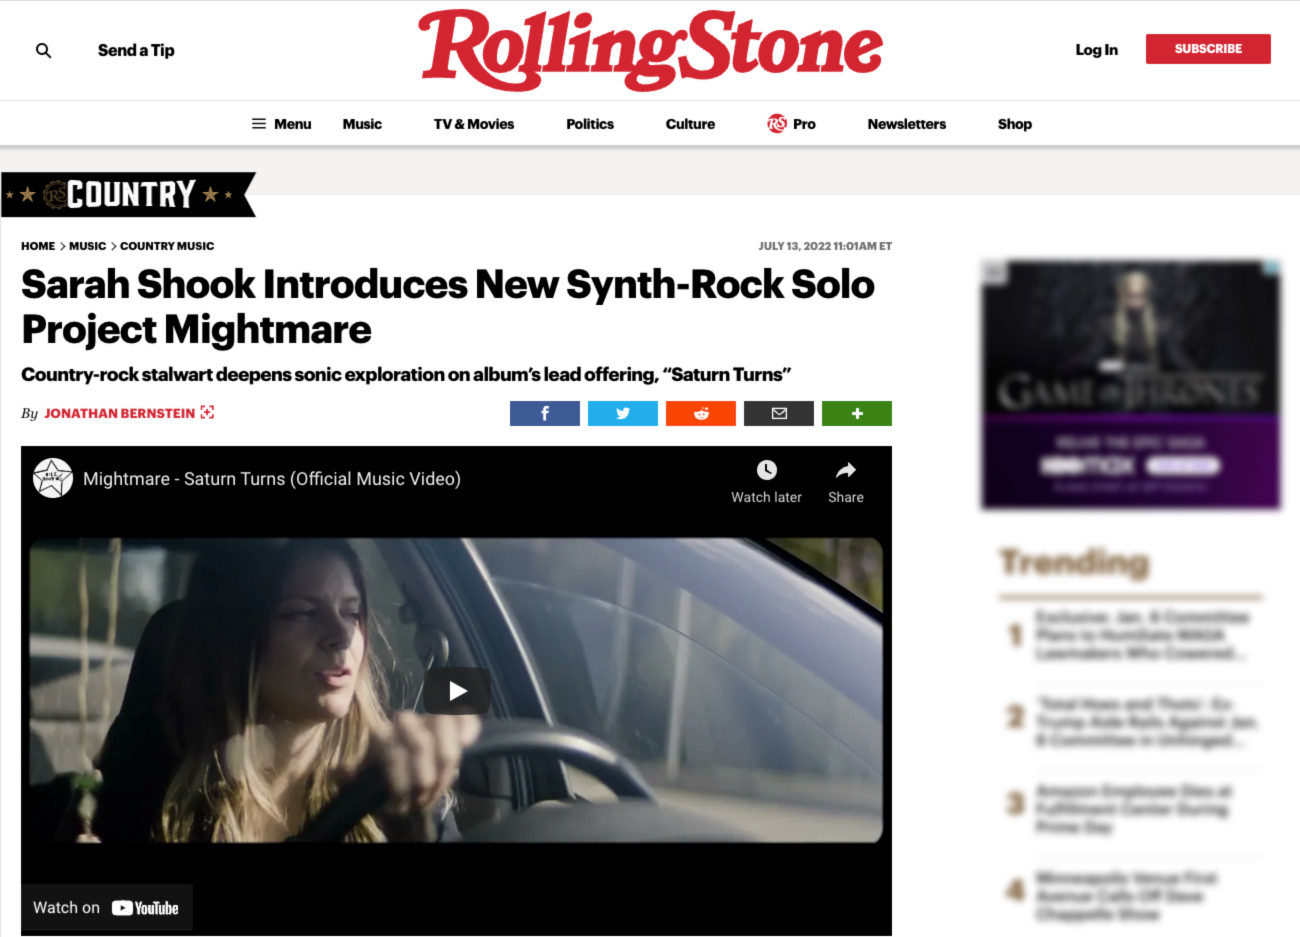 Rolling Stone’s article on Sarah Shook’s new solo project Mightmare.